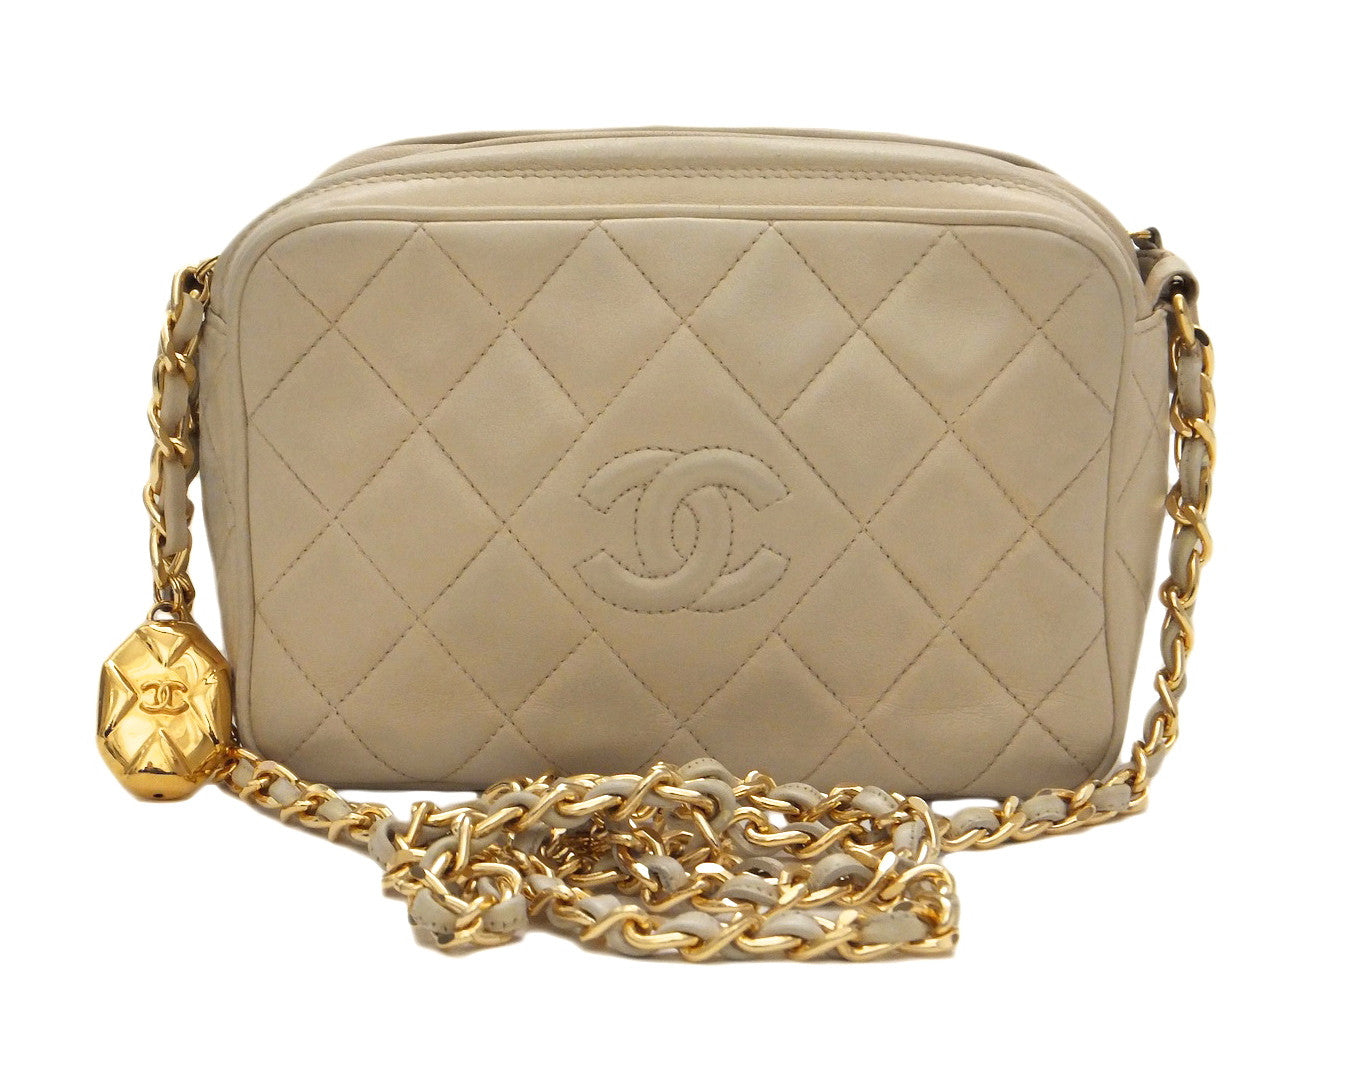 Authentic Chanel Vintage Beige Lambskin Quilted Camera Style